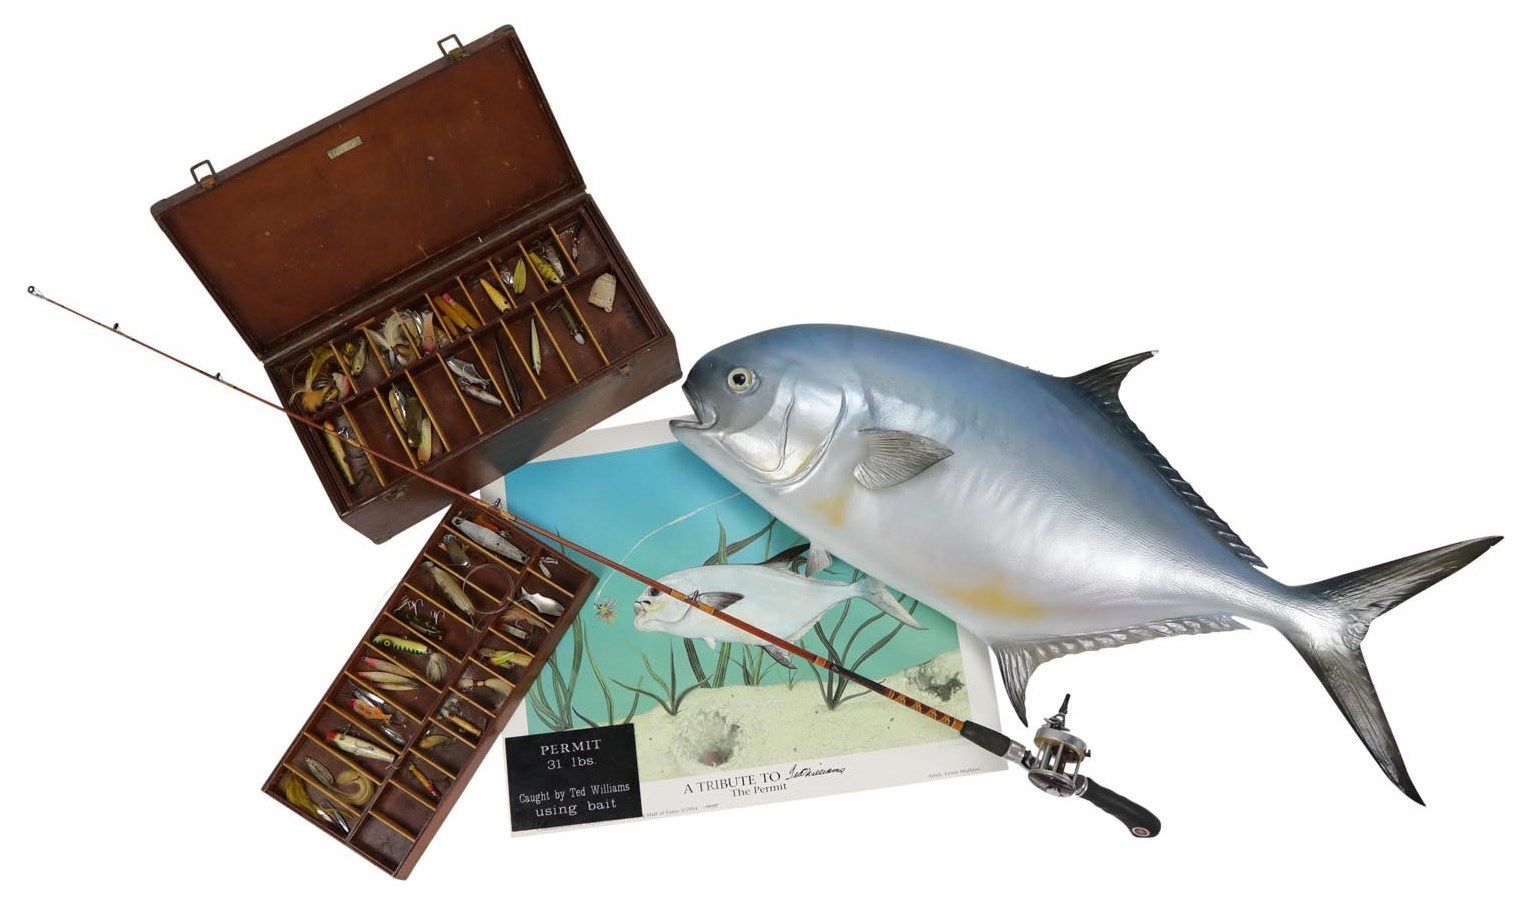 - Ted Williams "The Permit" with Rod and Reel and Favorite Tackle Box